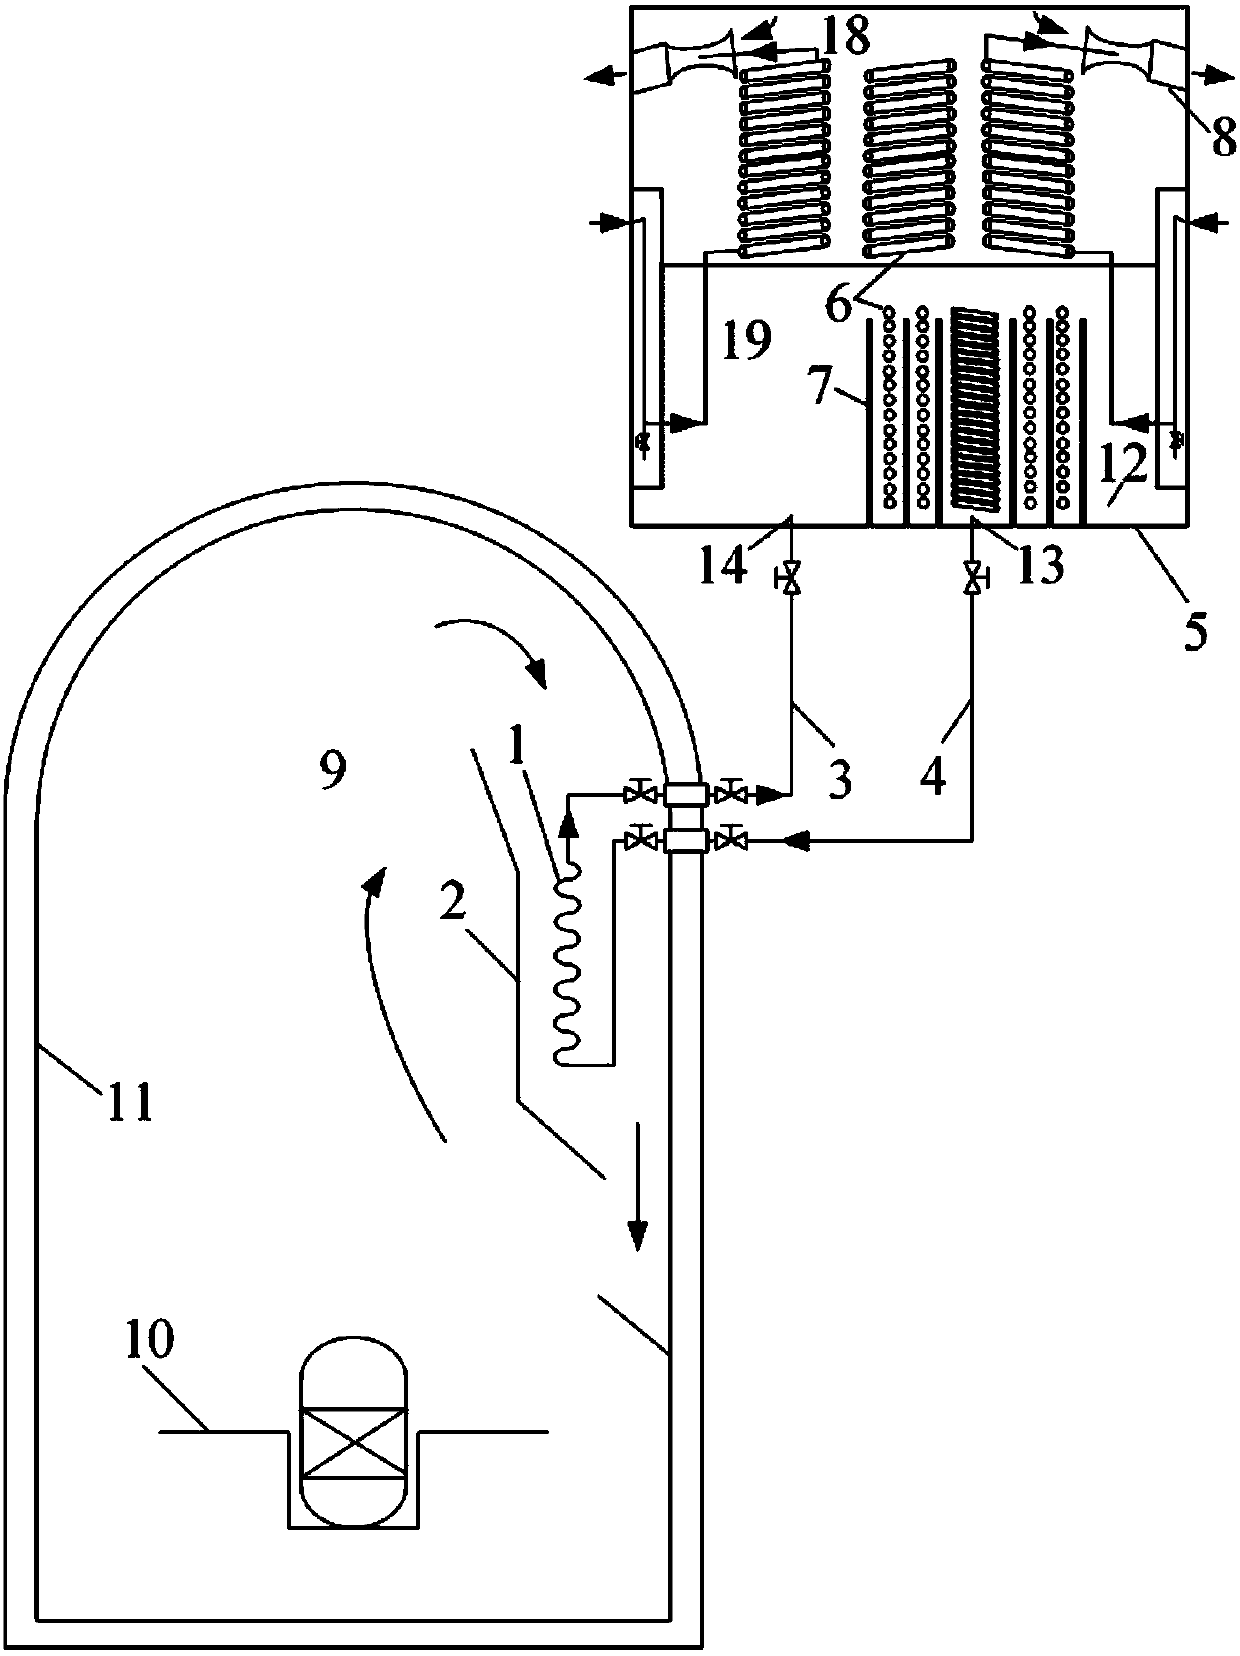 A long-term high-efficiency passive containment cooling system using jet technology